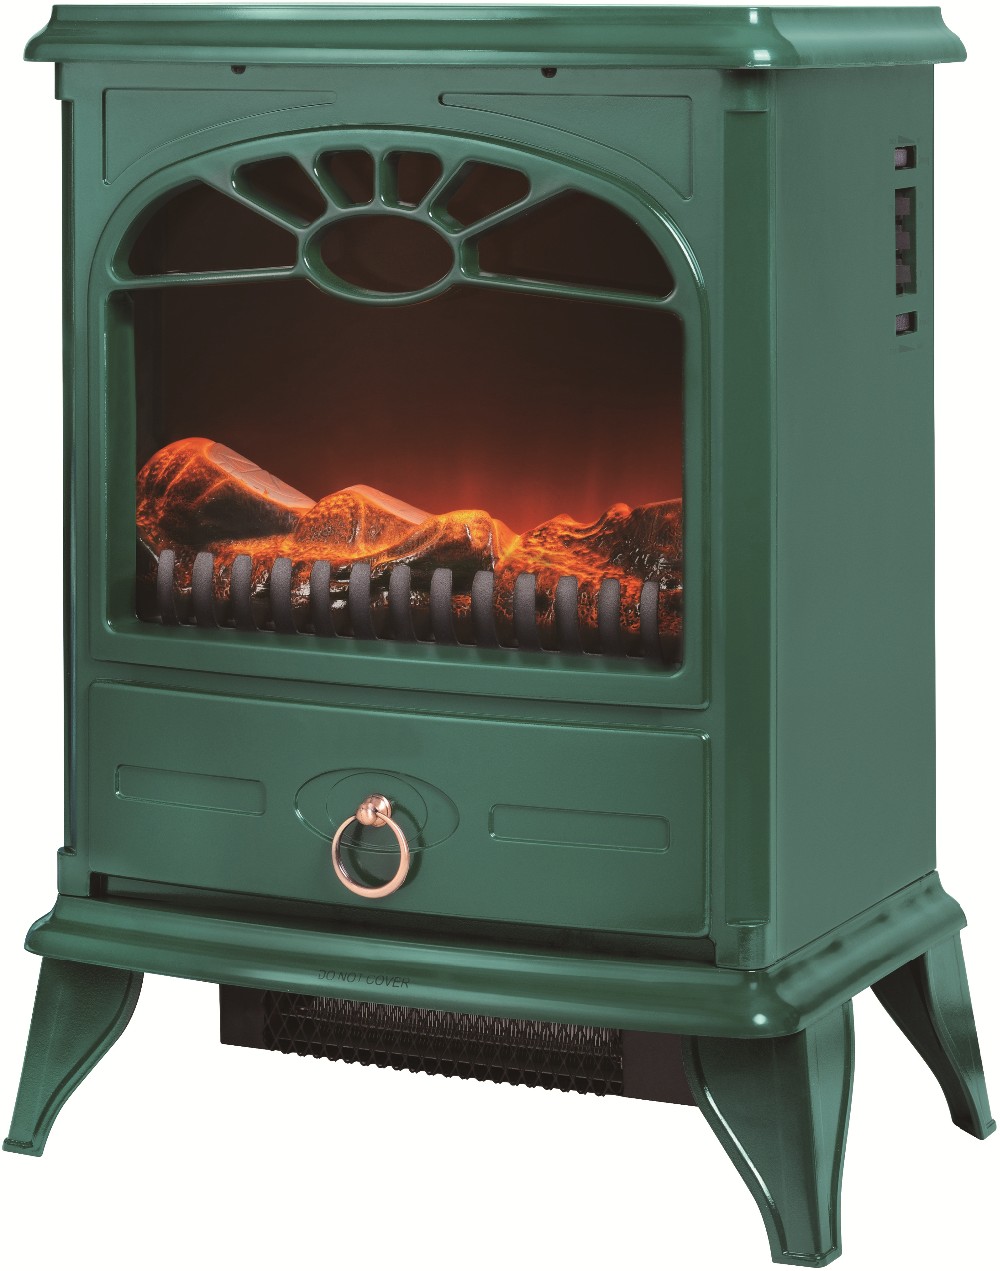 Portable Indoor Fireplace New Freestanding Indoor Portable Electric Fireplace Stove Heater